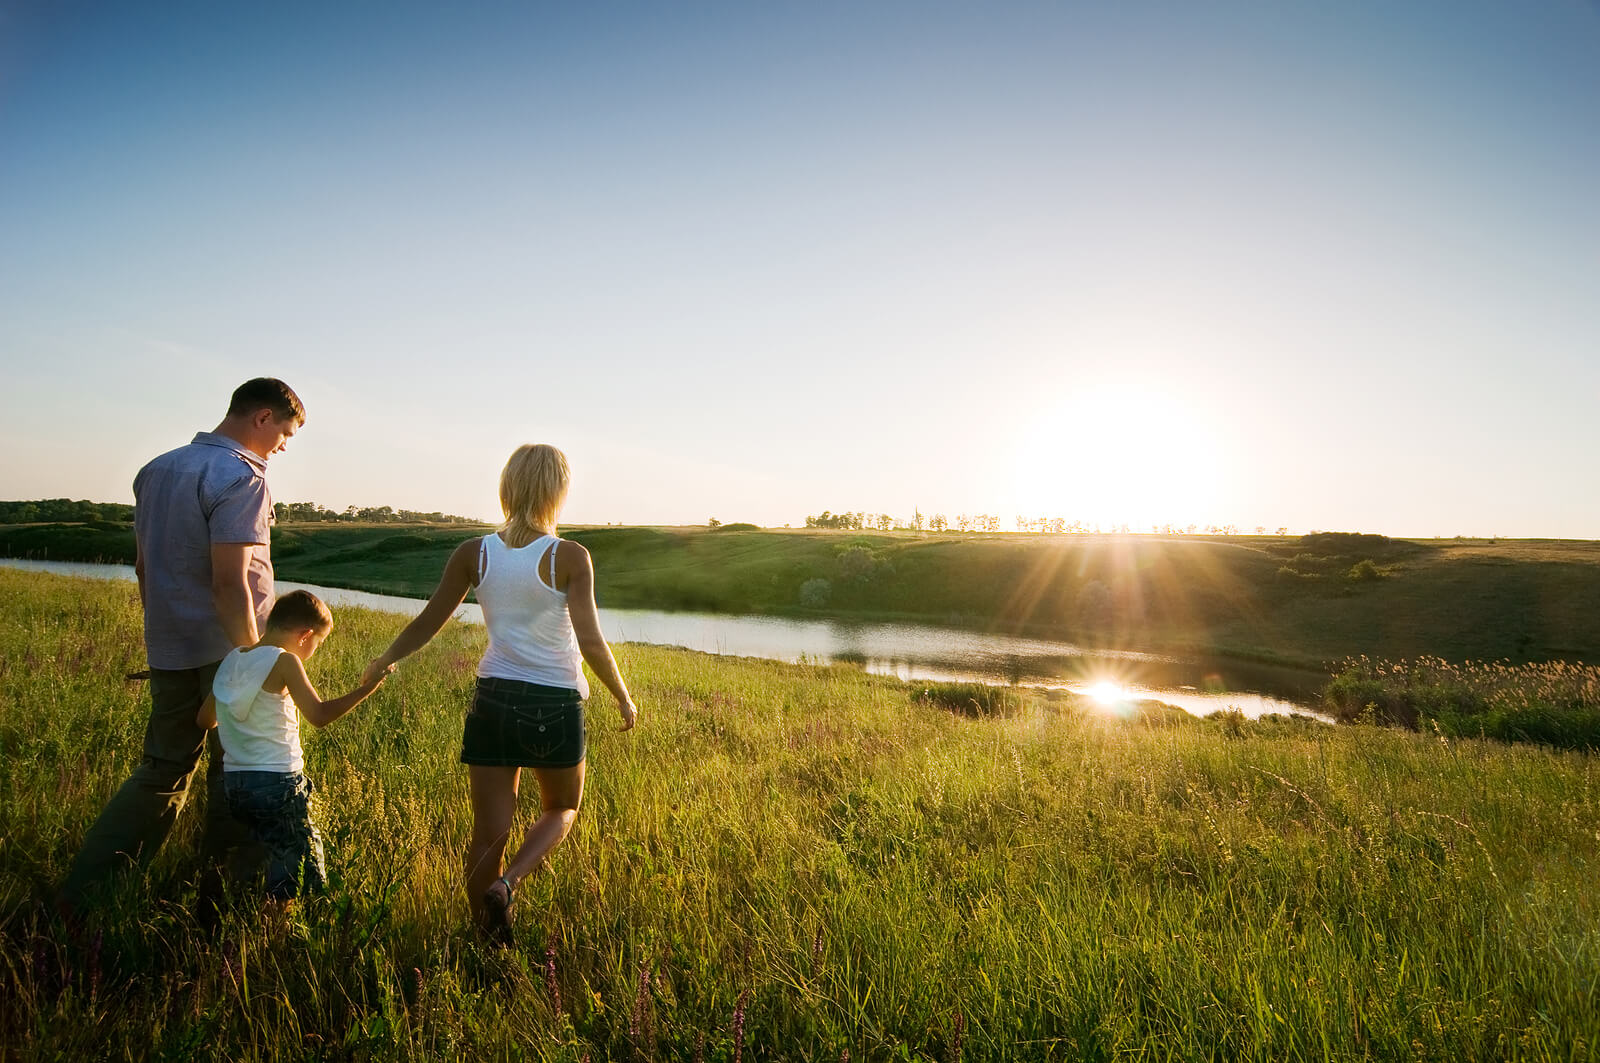 Image of a happy family walking through a field during sunset. If your child is dealing from the loss of a loved one, learn how they can begin to cope in positive ways with grief counseling in Saint Petersburg, FL.